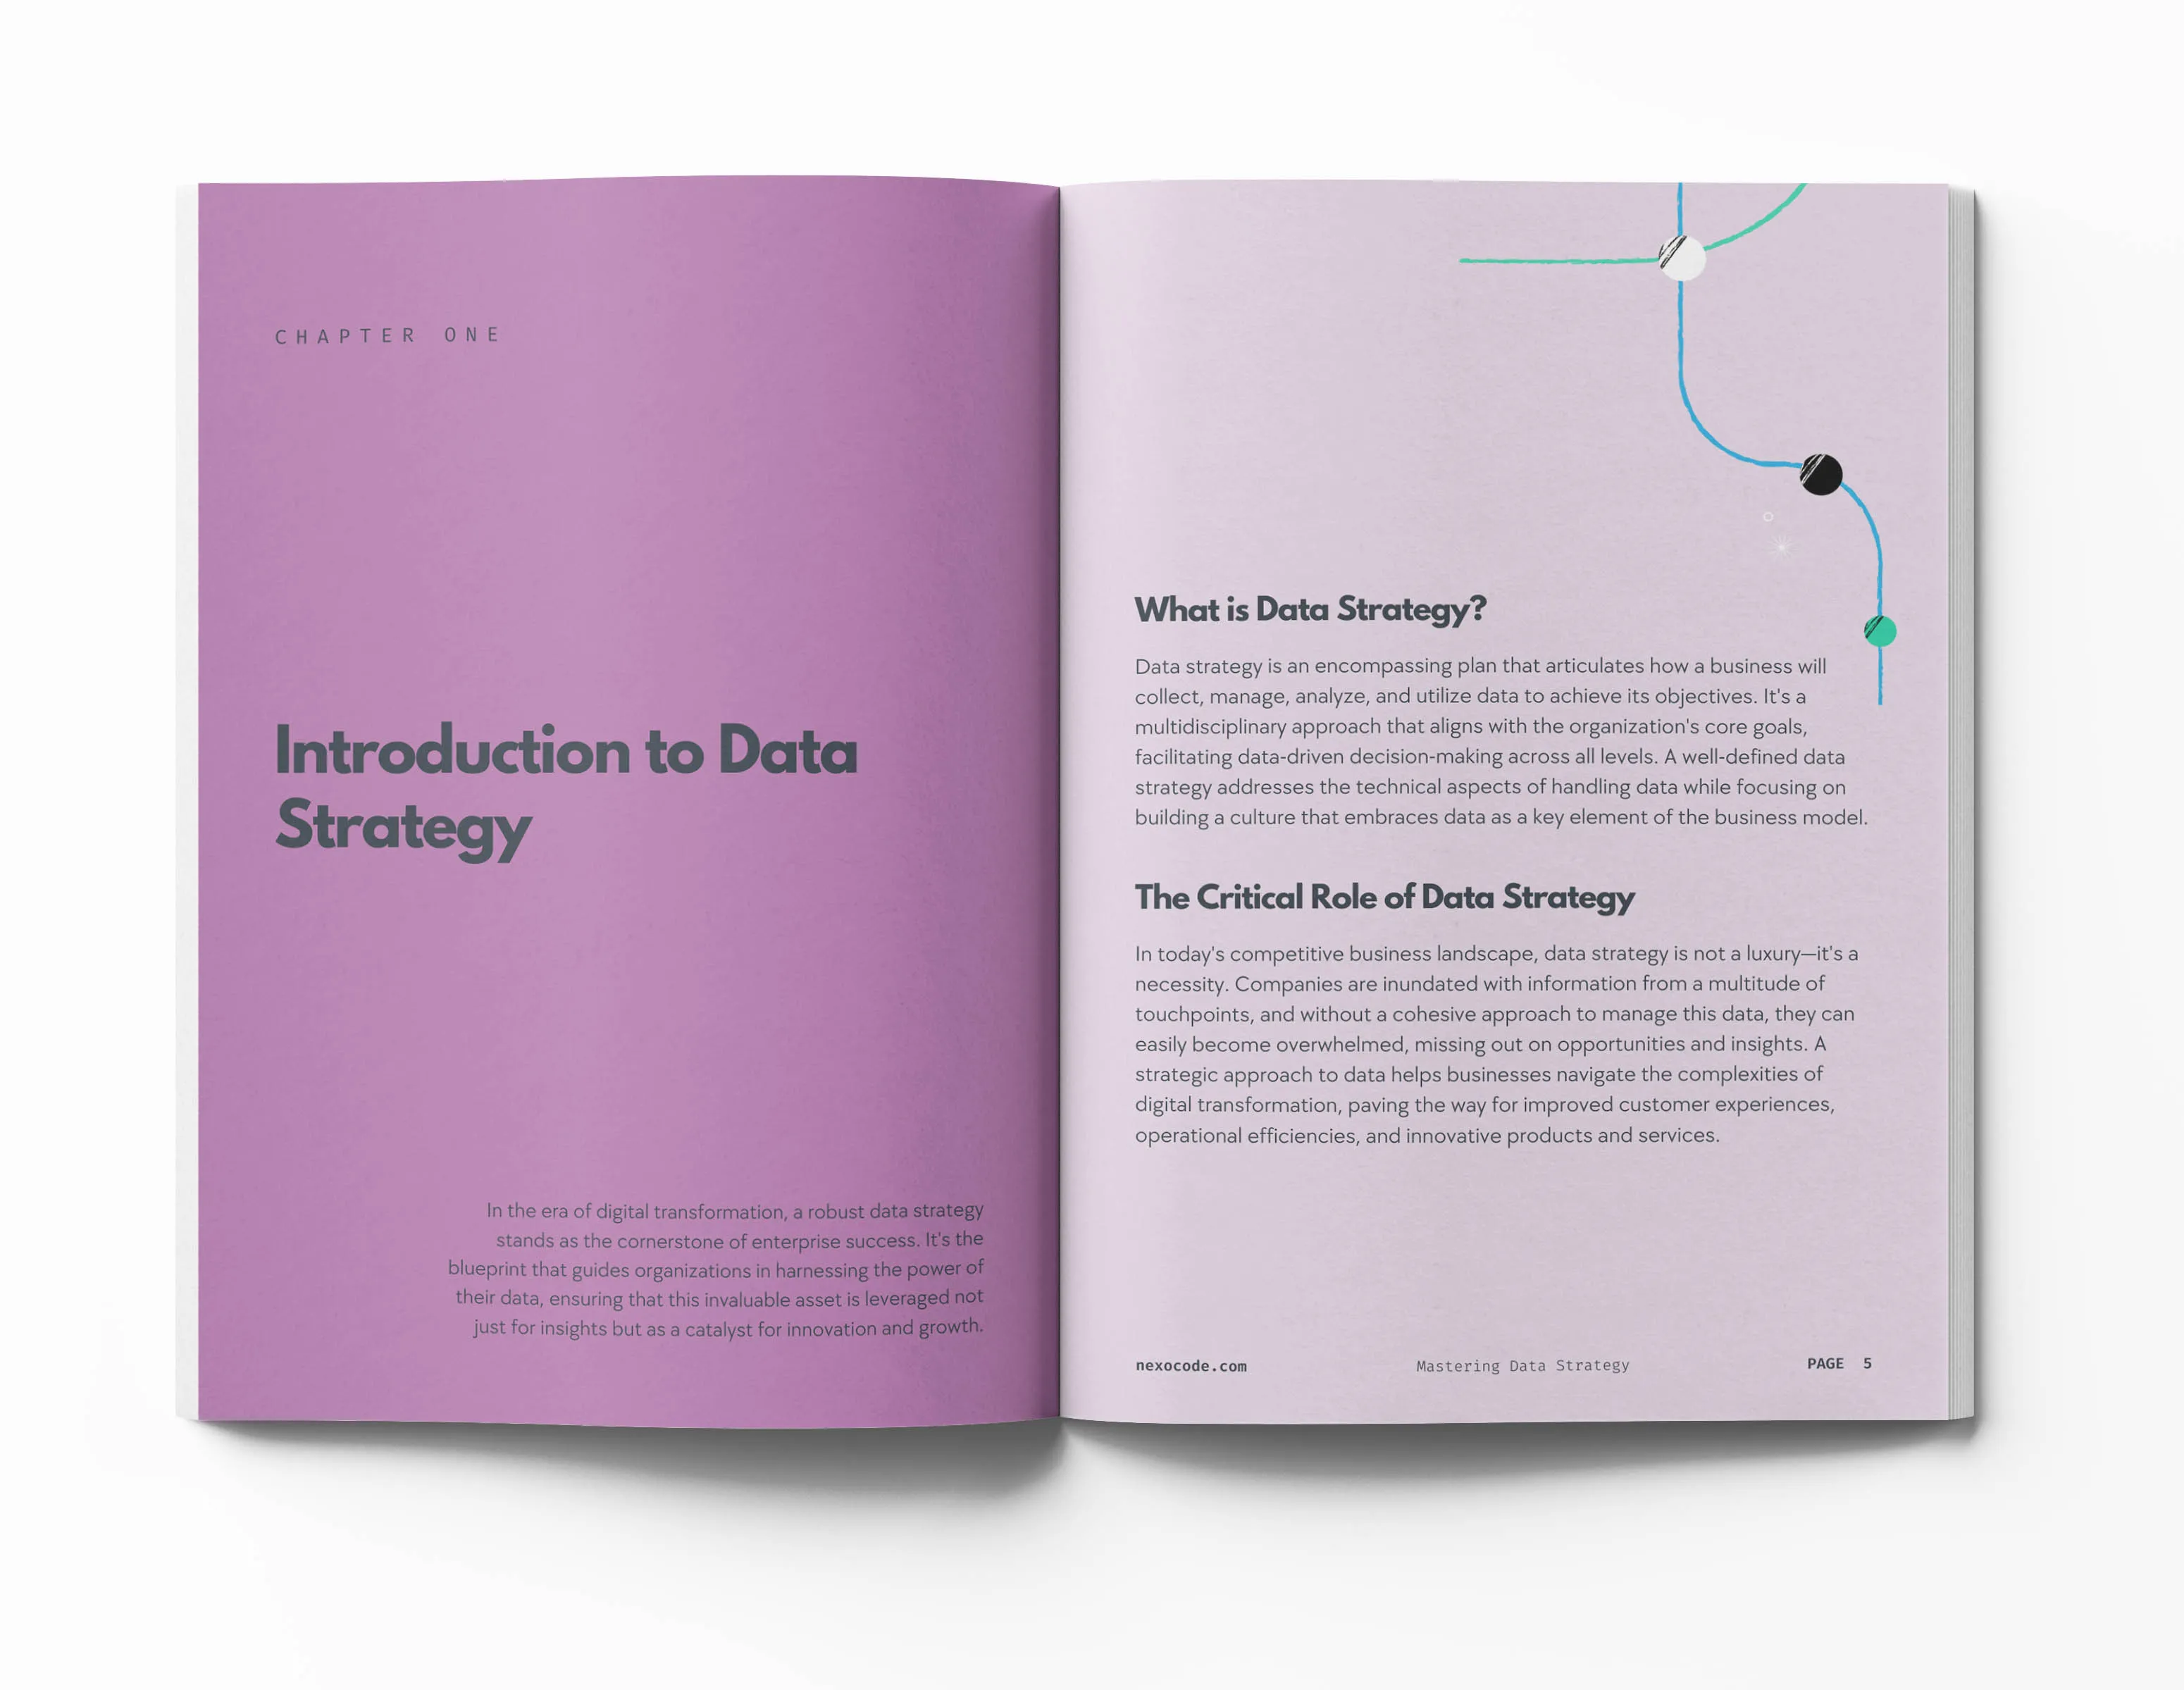 Are you ready to unlock the full potential of data strategy?